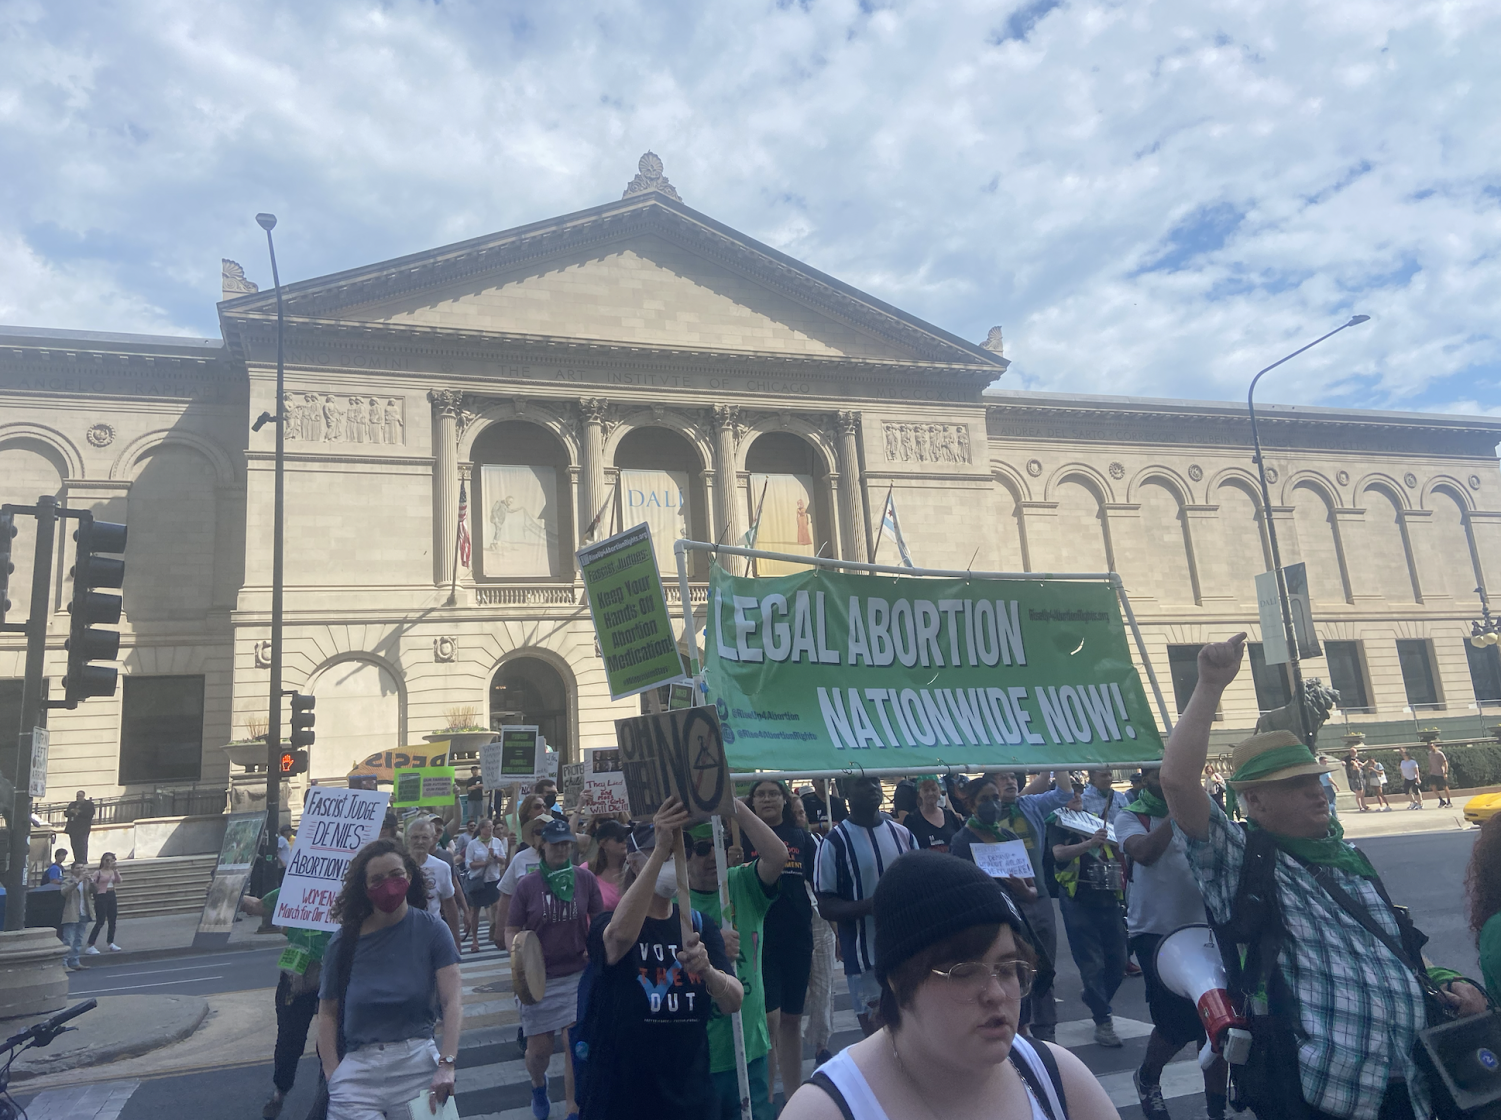 A crowd of people walk across a city street, carrying green and black signs and a green banner reading ‘Legal Abortion Nationwide.’ The Art Institute of Chicago is visible in the background. 